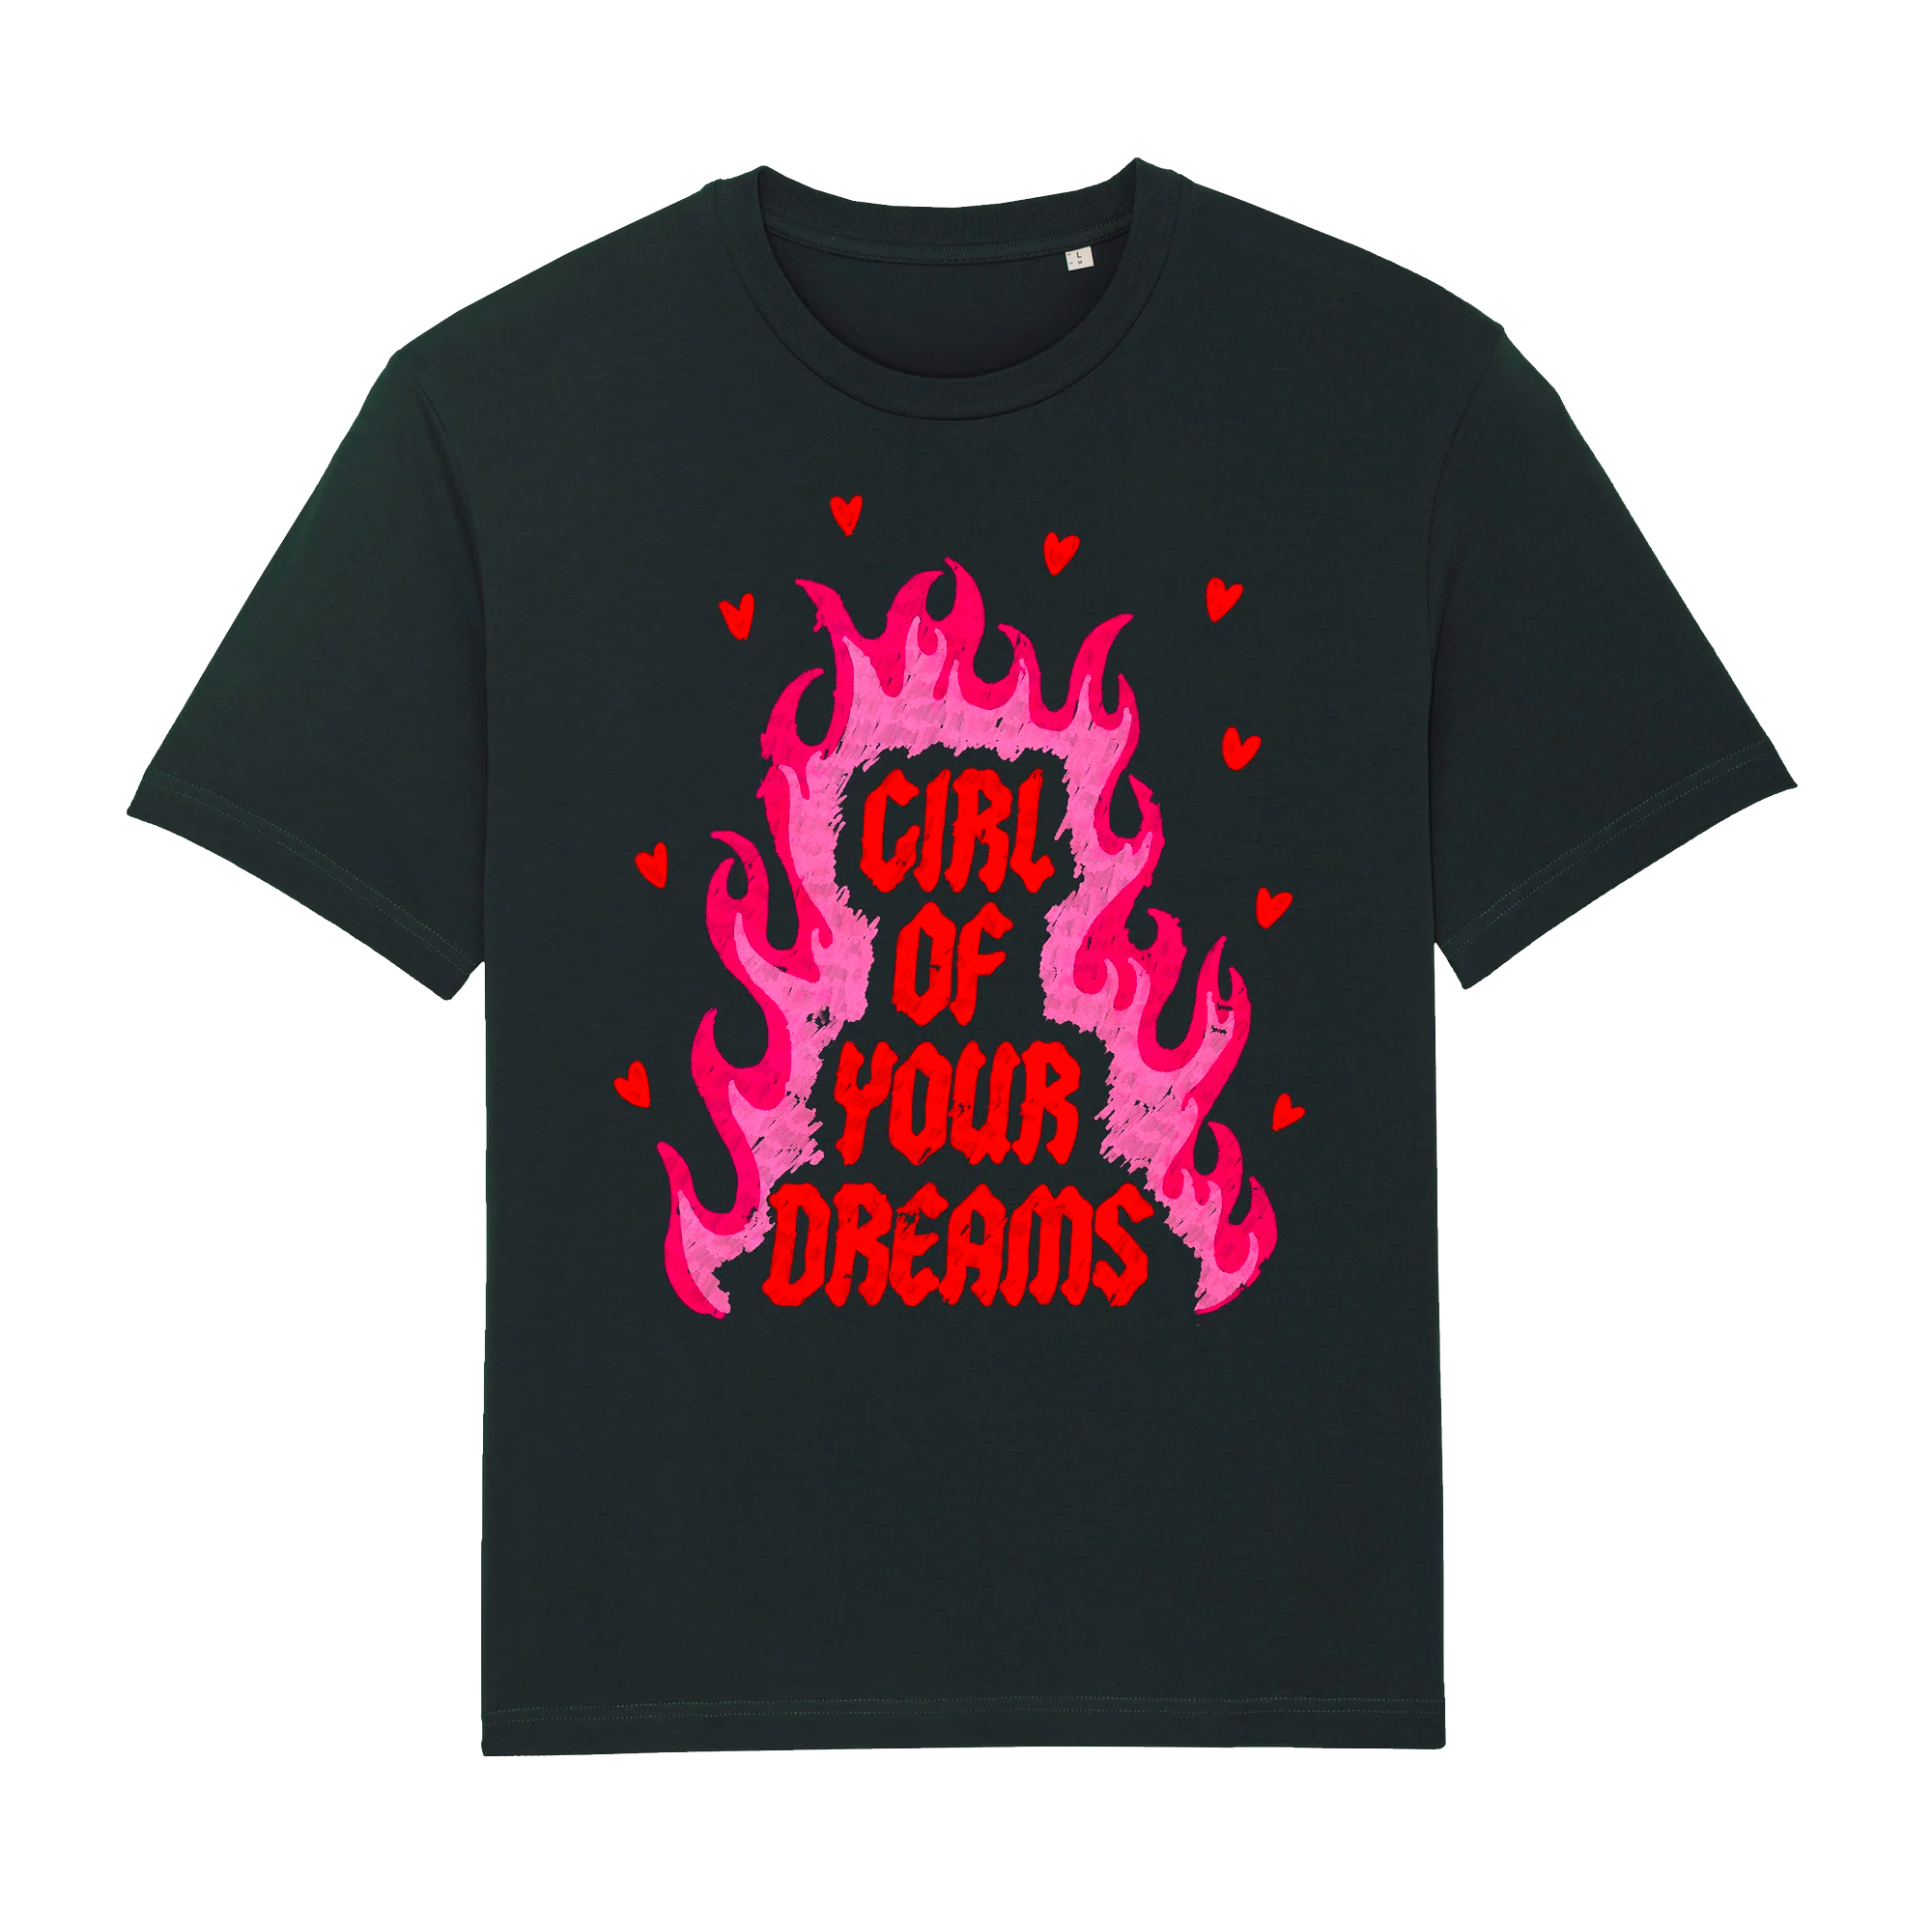 Dylan - Girl Of Your Dreams Tee: Black